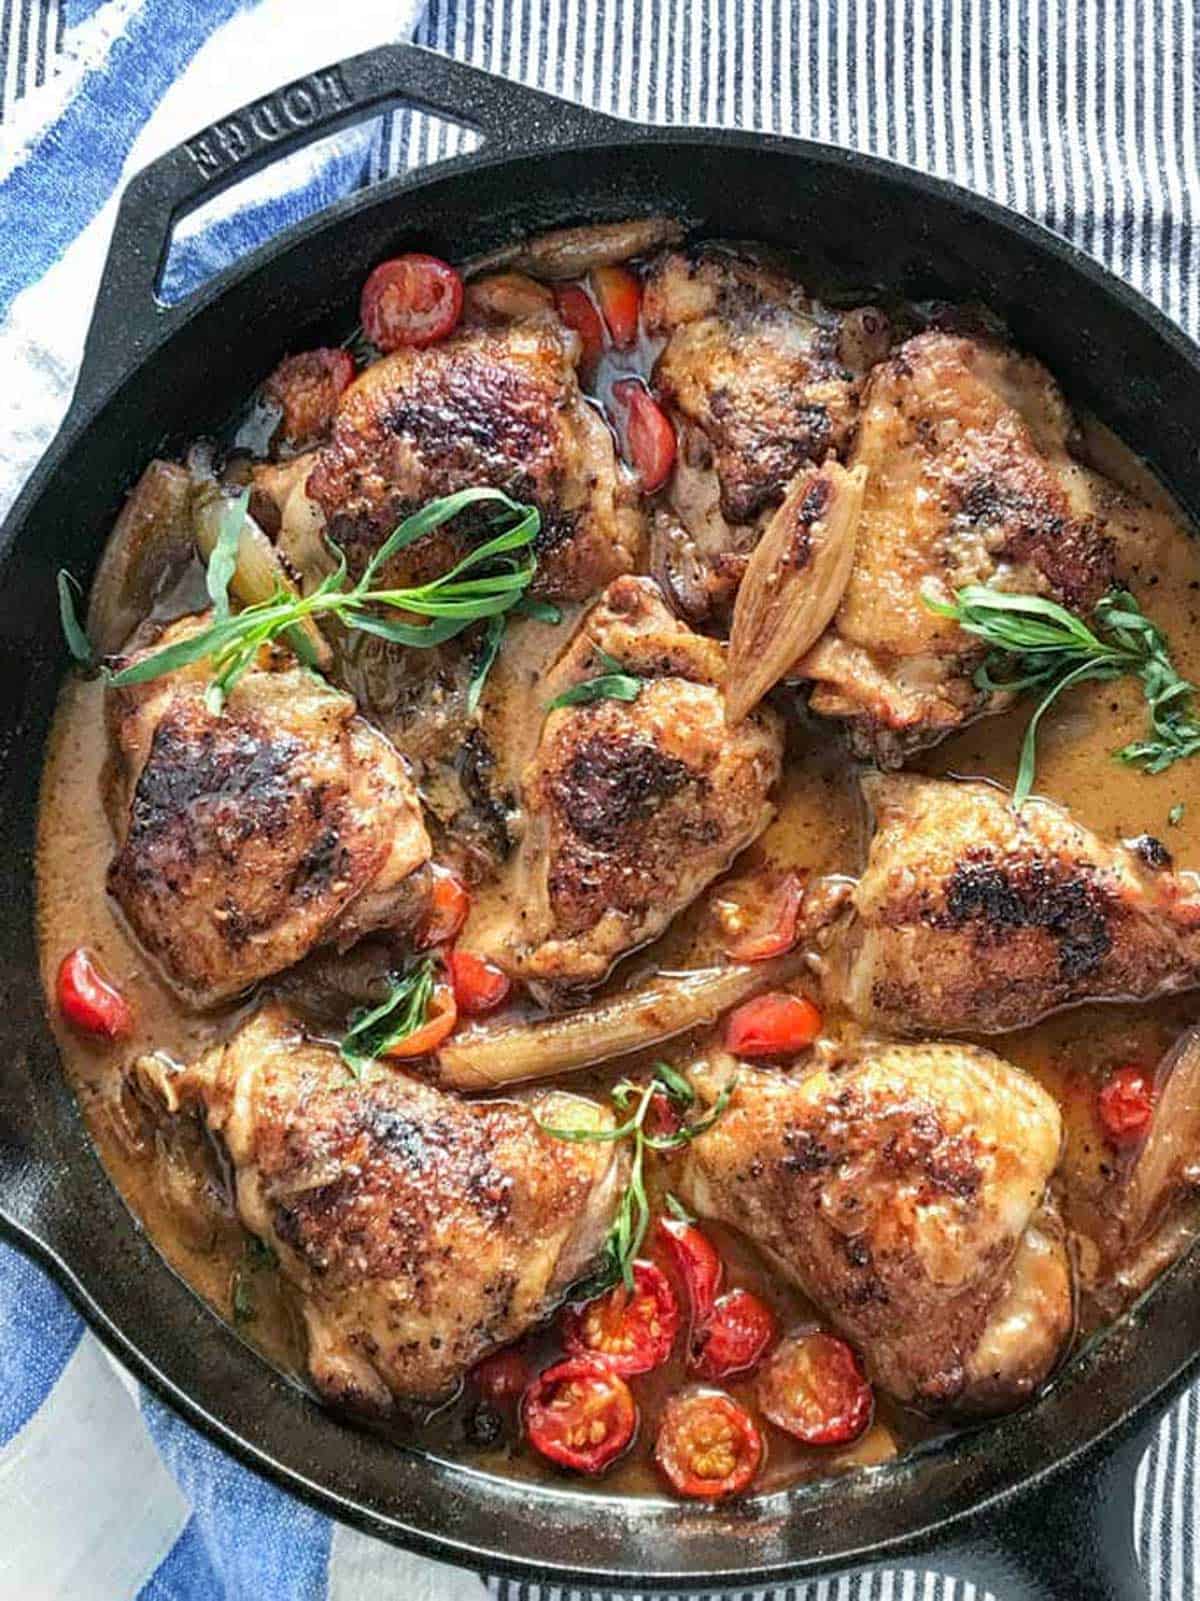 8 oven braised chicken thighs in a cast iron skillet with cherry tomatoes, shallots and sprigs of tarragon